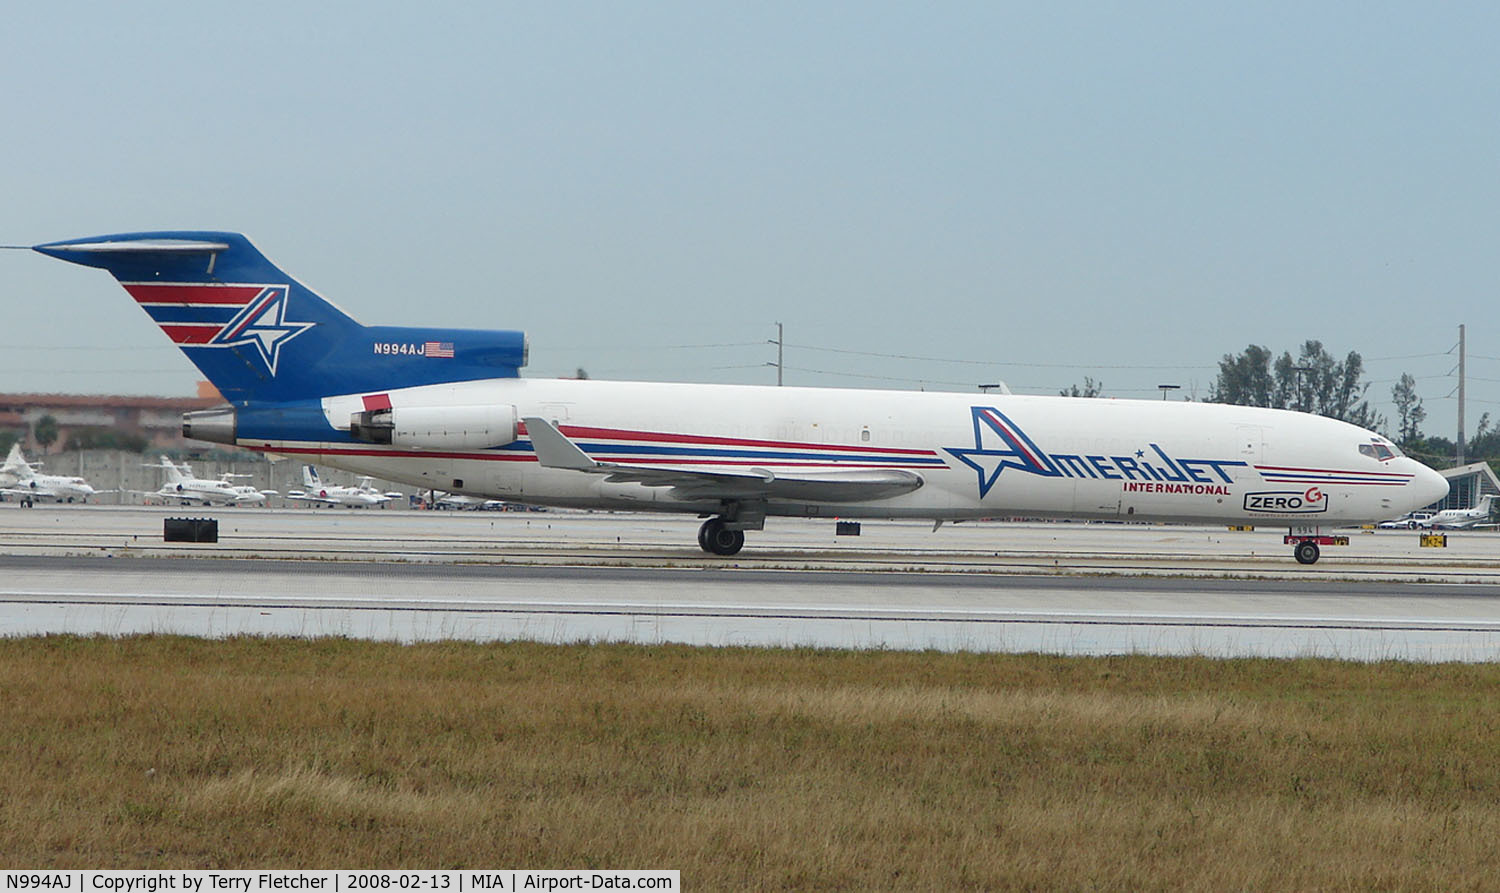 N994AJ, 1975 Boeing 727-233F C/N 20942, Amerijet B727 taxying to the ramp in Cargo at Miami